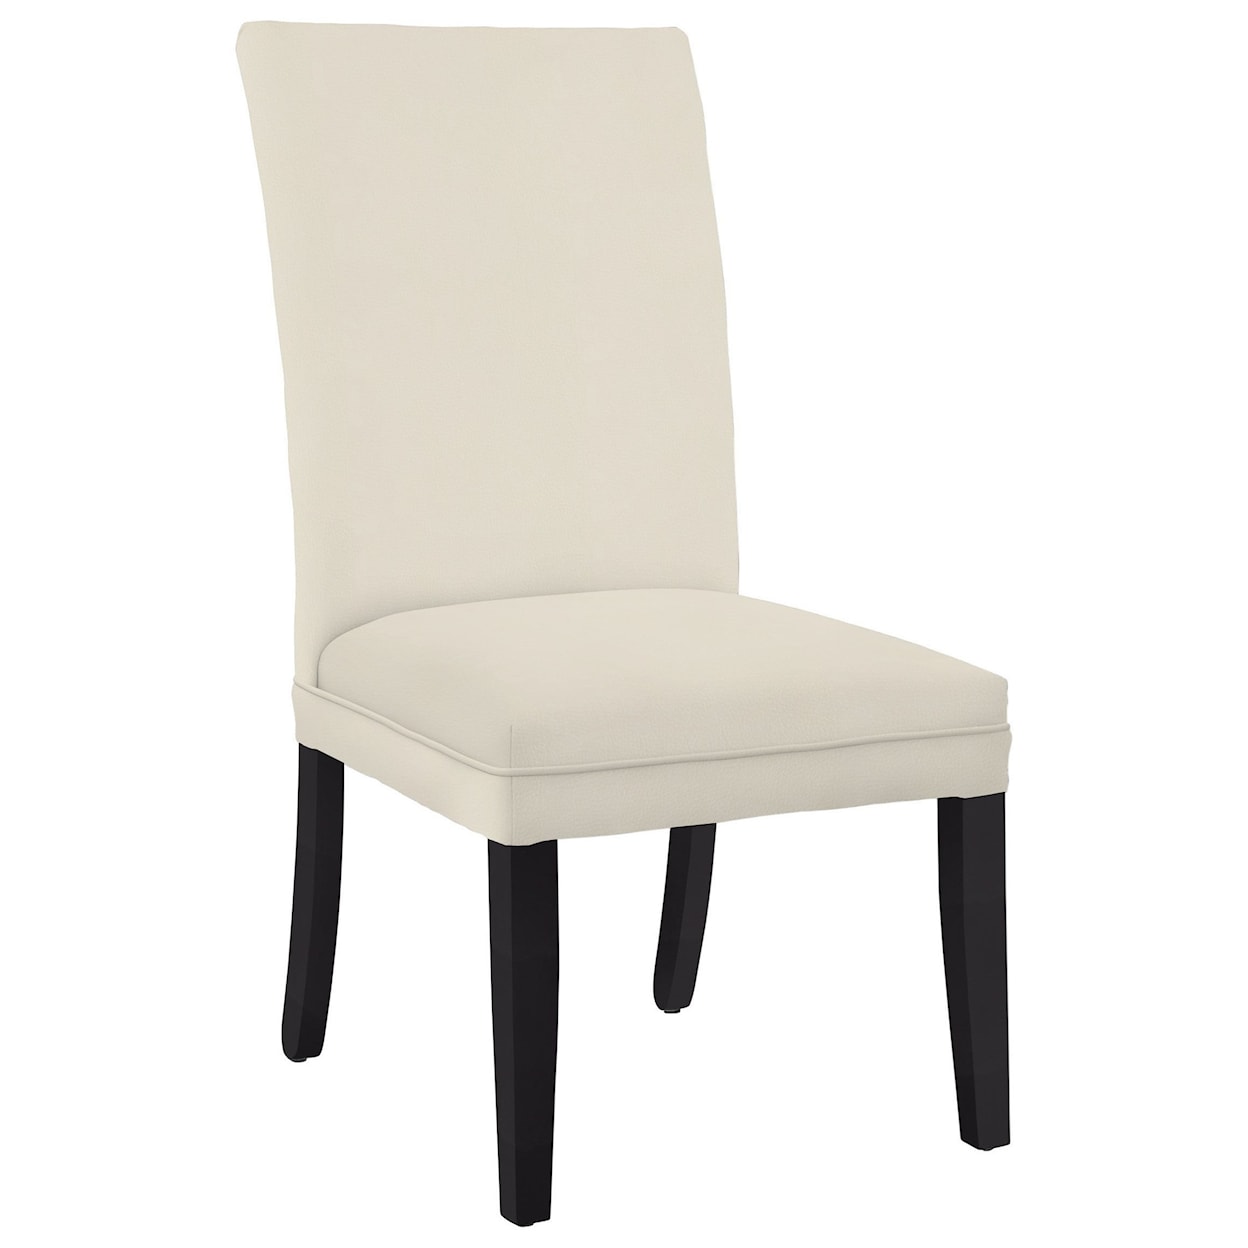 Hekman Comfort Zone Dining Jenny Dining Side Chair